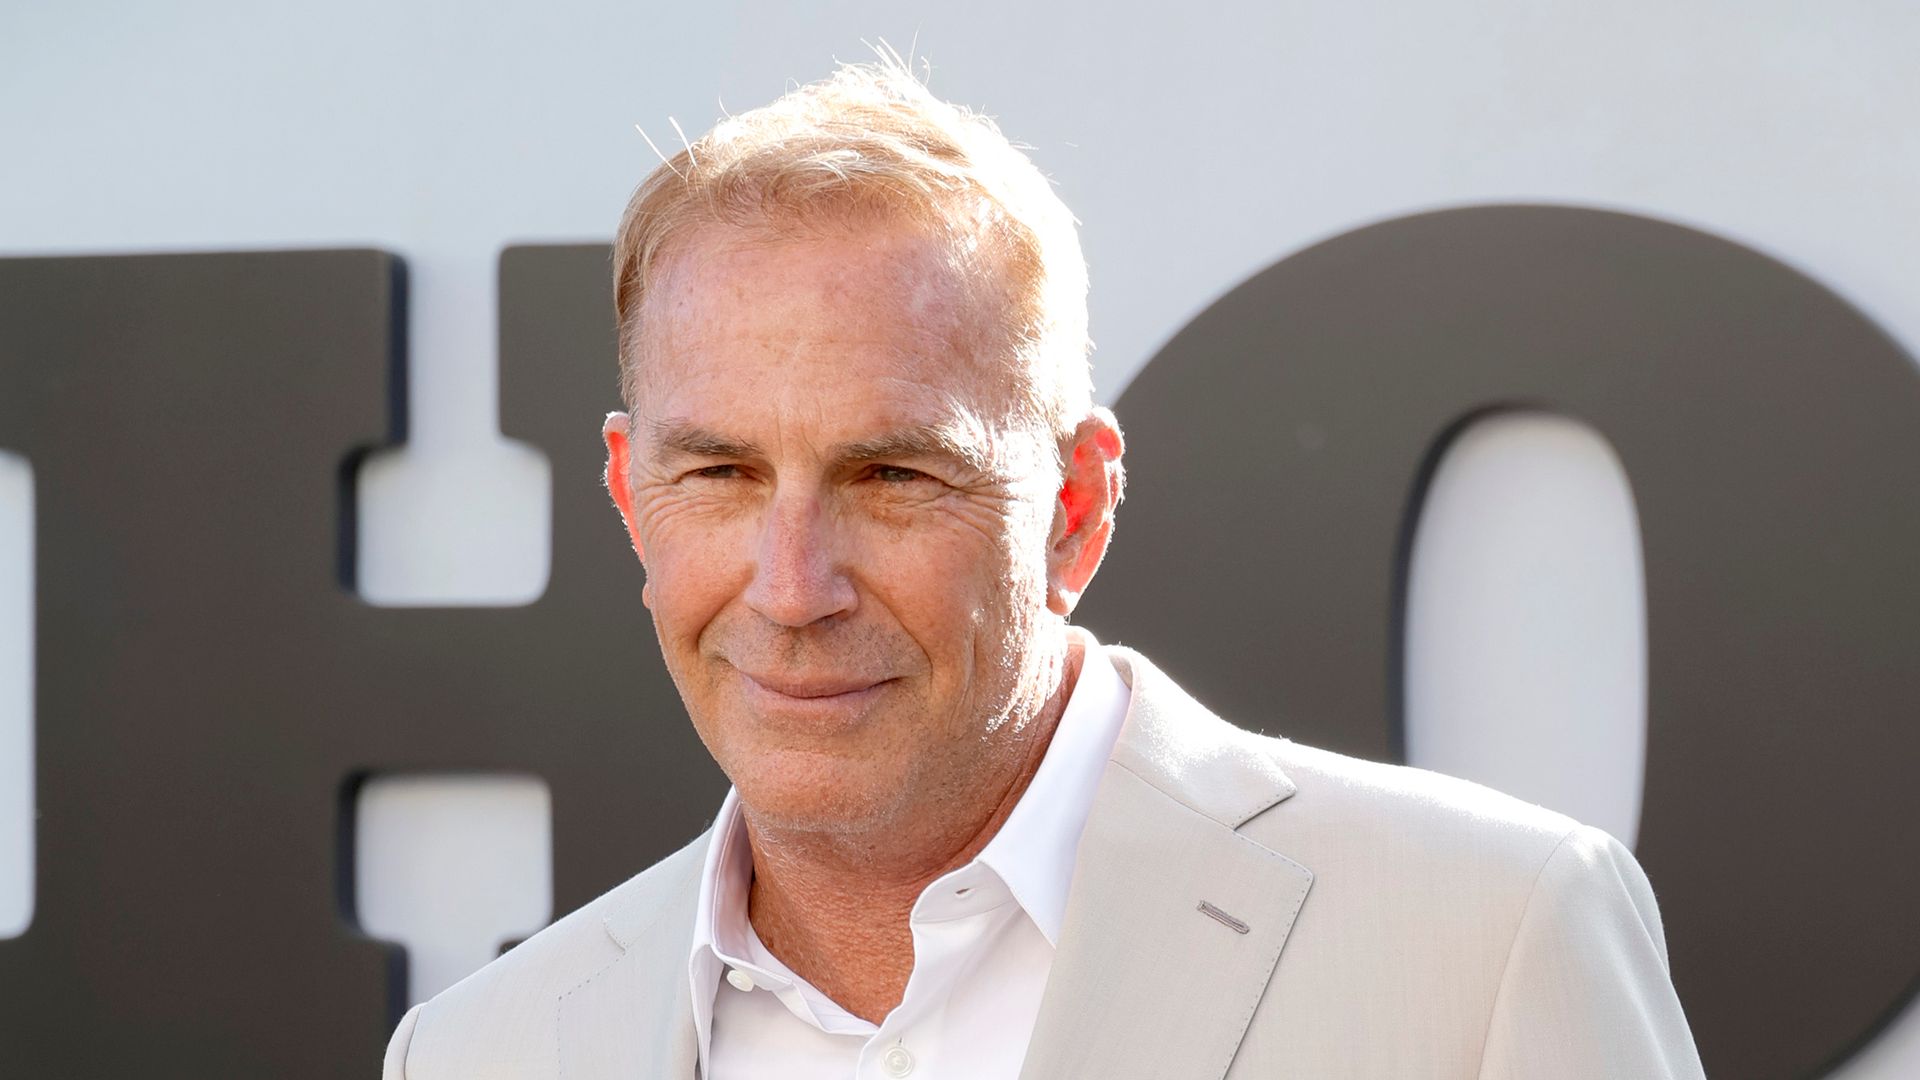 Kevin Costner attends the US Premiere of "Horizon: An American Saga - Chapter 1" at Regency Village Theatre on June 24, 2024 in Los Angeles, California.